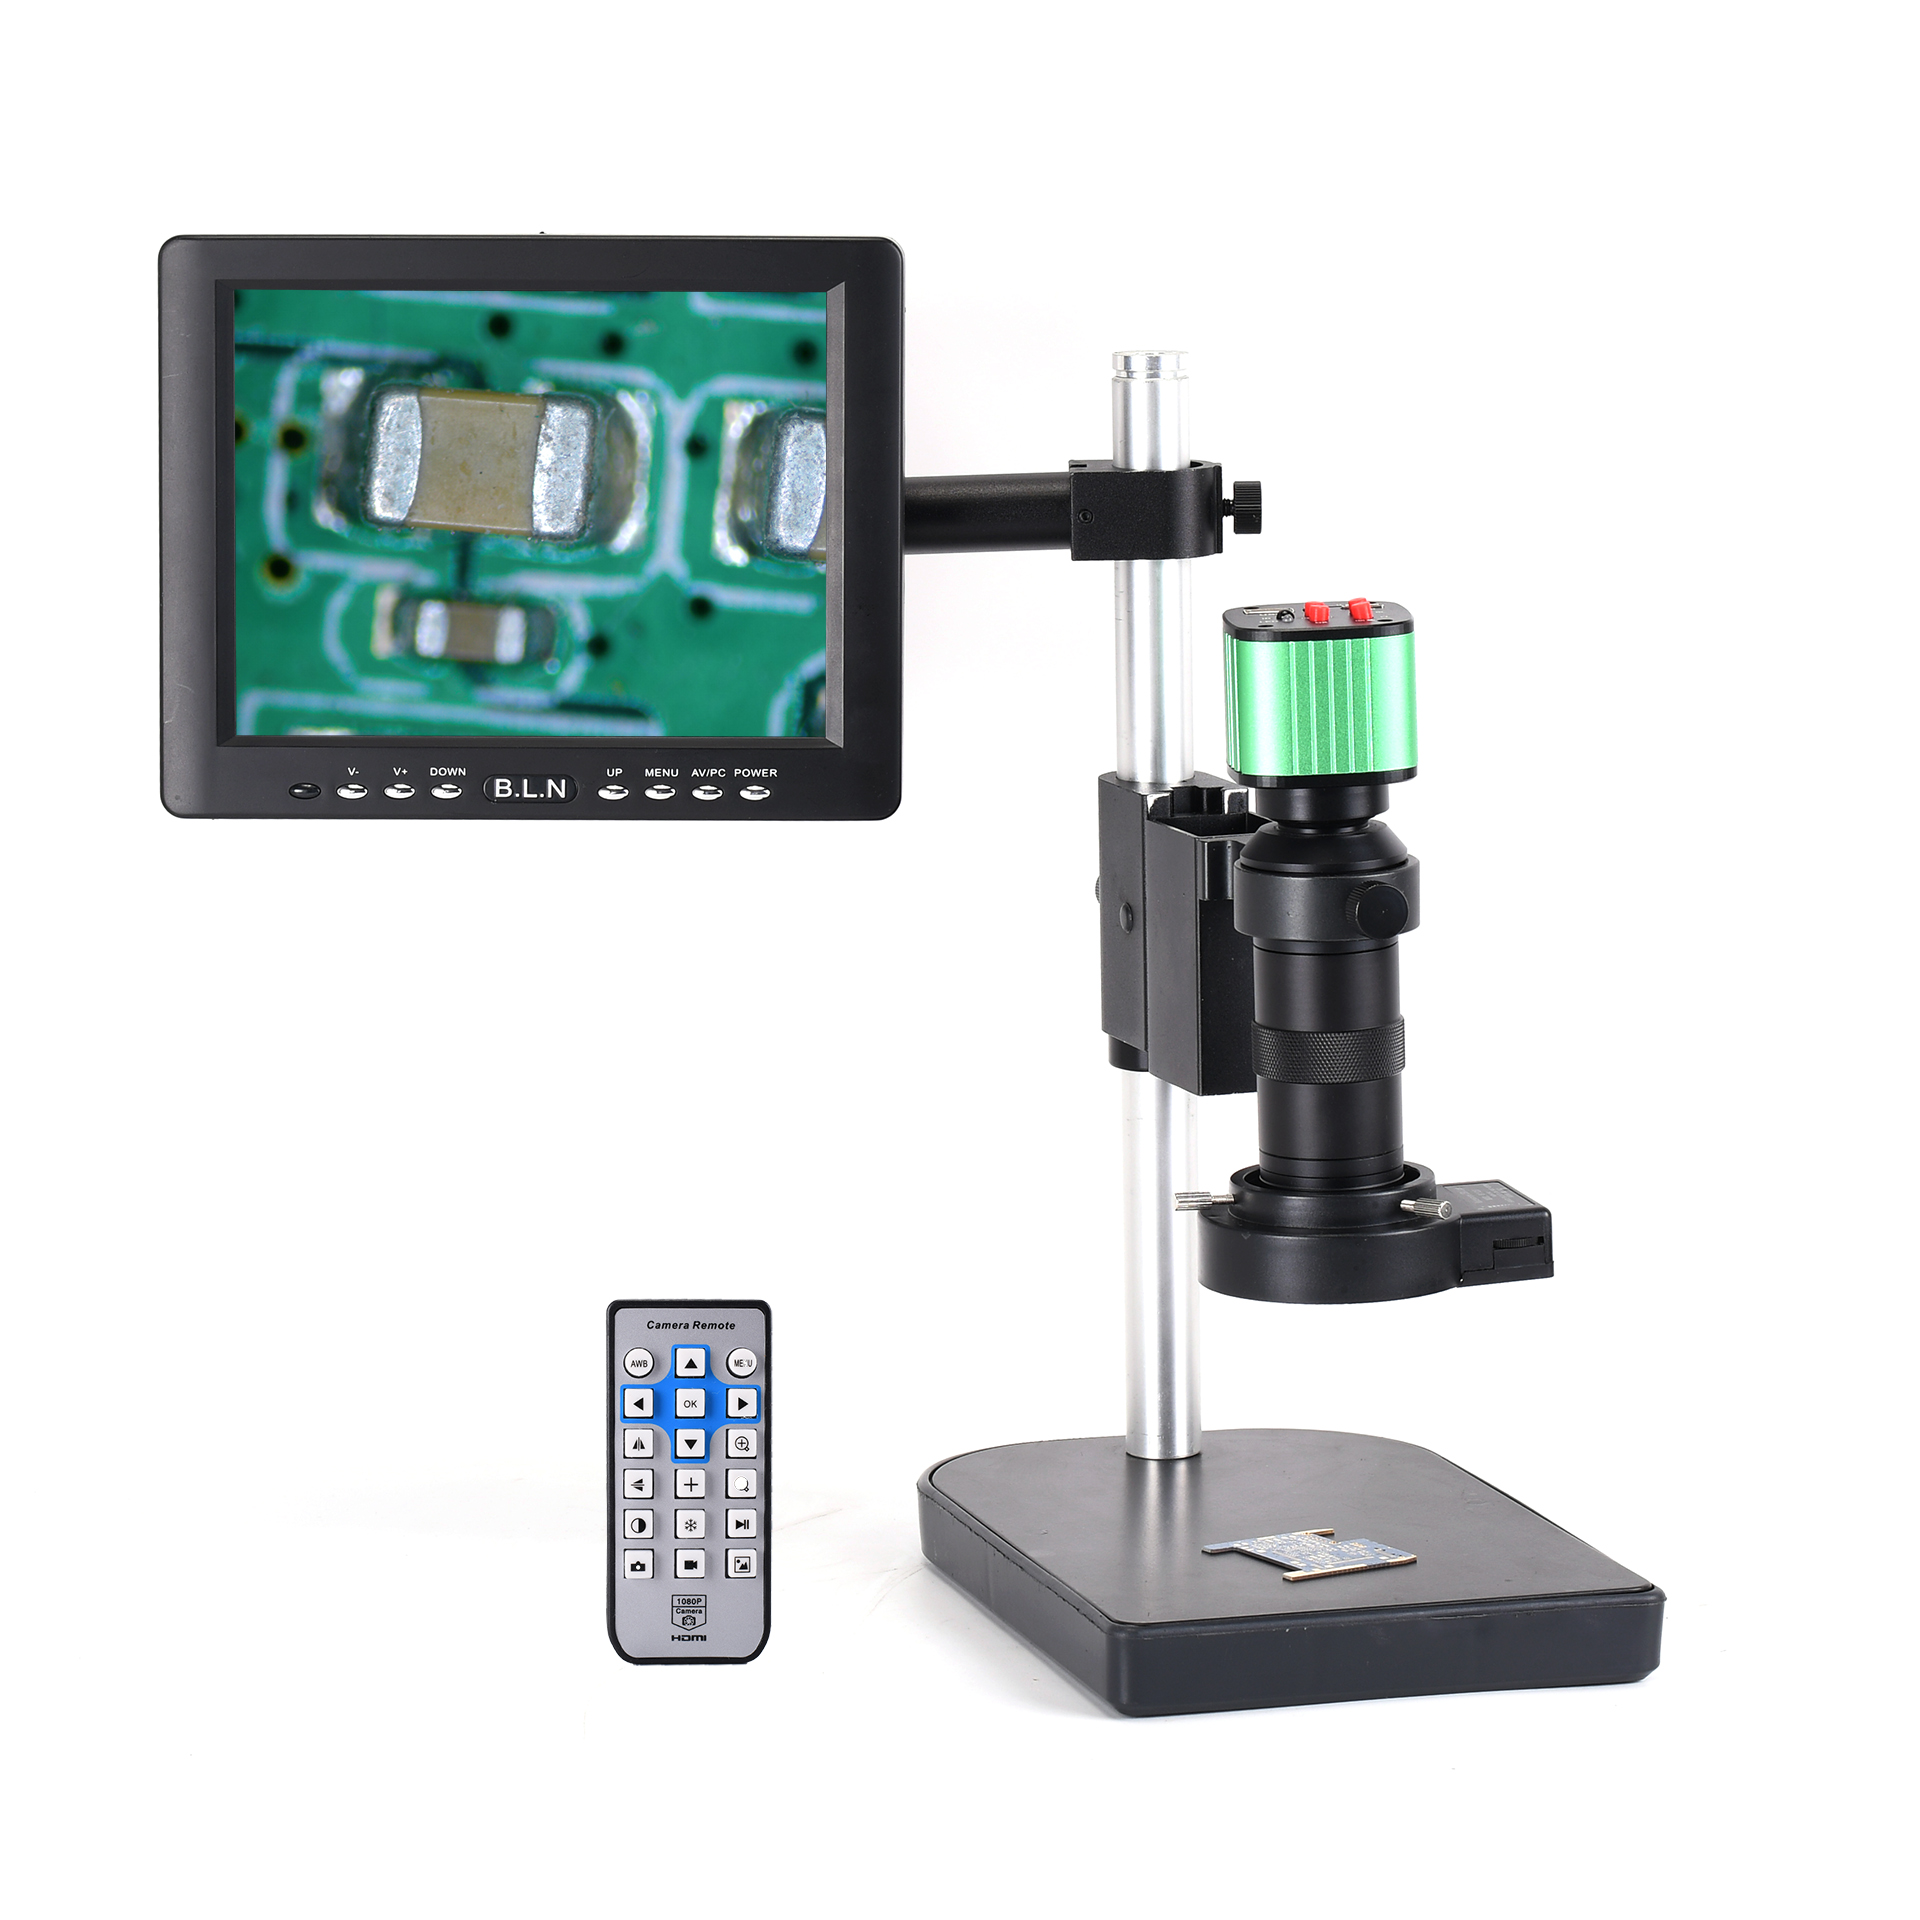 

HAYEAR 16MP 1080P USB Video Microscope Camera with C-mount Lens 40 LED Light 8' inch LCD Monitor for PCB Repair